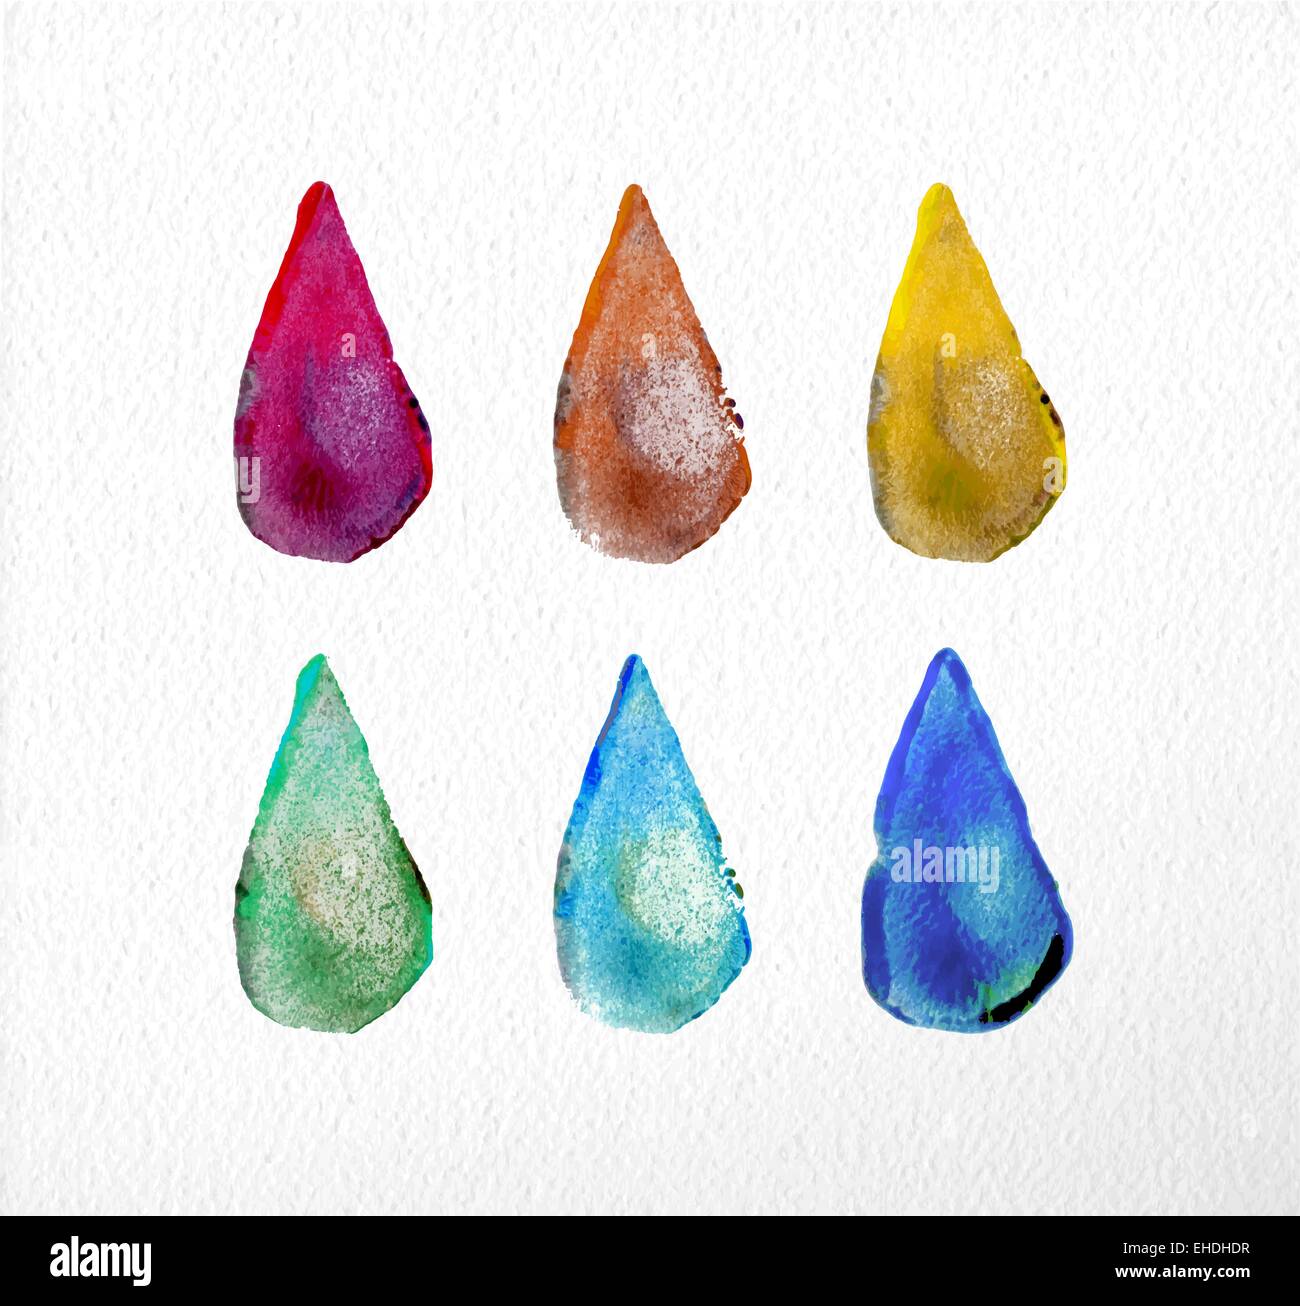 Set of watercolor drop elements hand drawn illustration. EPS10 vector file organized in layers for easy editing. Stock Vector